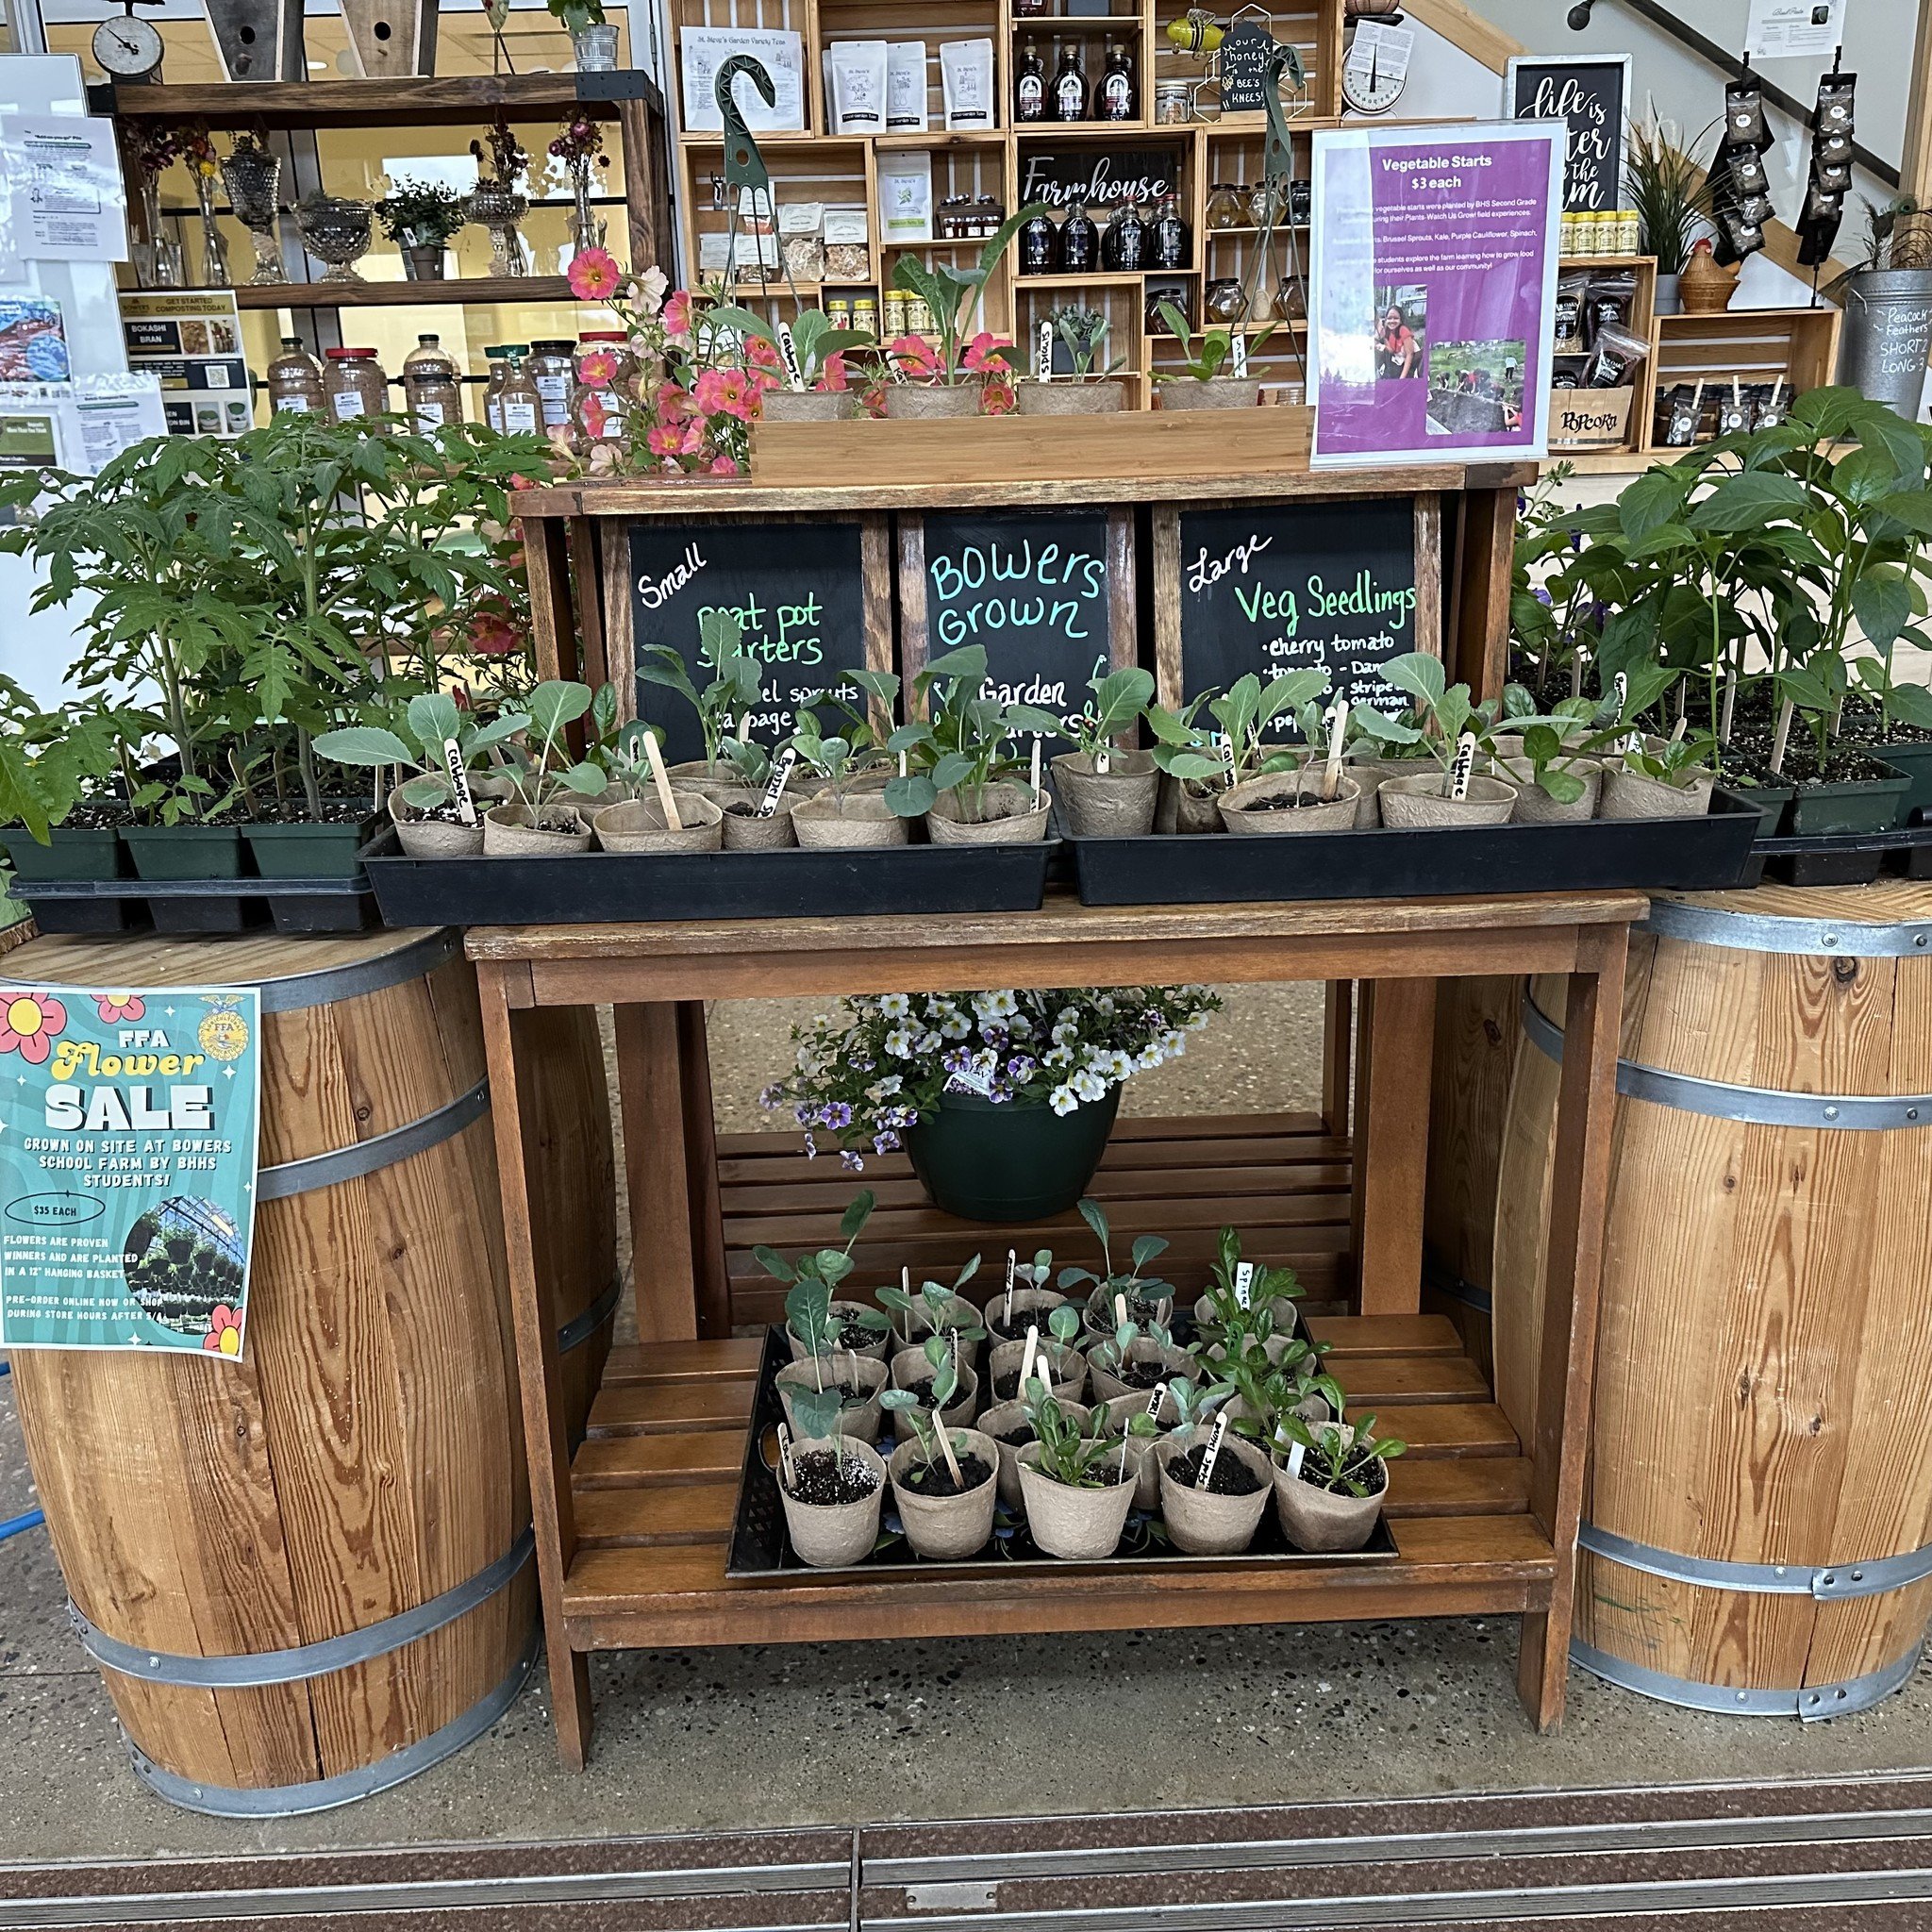 Looking for a little something local to celebrate Mothers Day? 
We got you! 
Hanging flower baskets, select organic veg seedlings, honey, teas, soaps, garden &amp; goat skincare items, scratch heirloom sourdough and bakery items, and more. 💕🌼
Barns